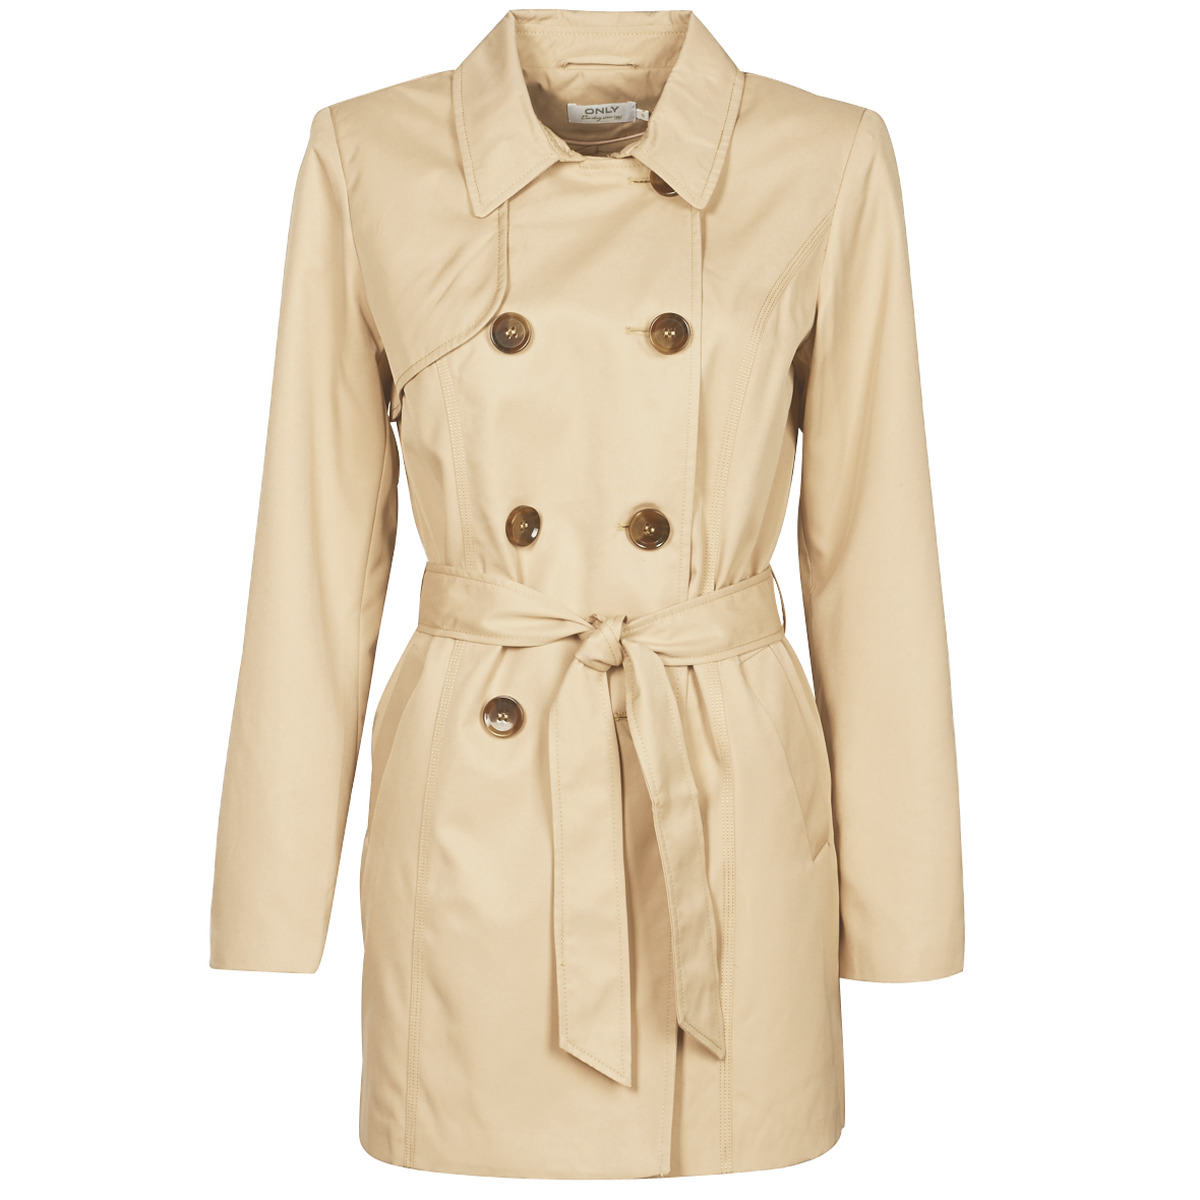 Beige Europe - coats Only delivery ONLVALERIE € | 55,00 Women Fast Clothing ! - Spartoo Trench